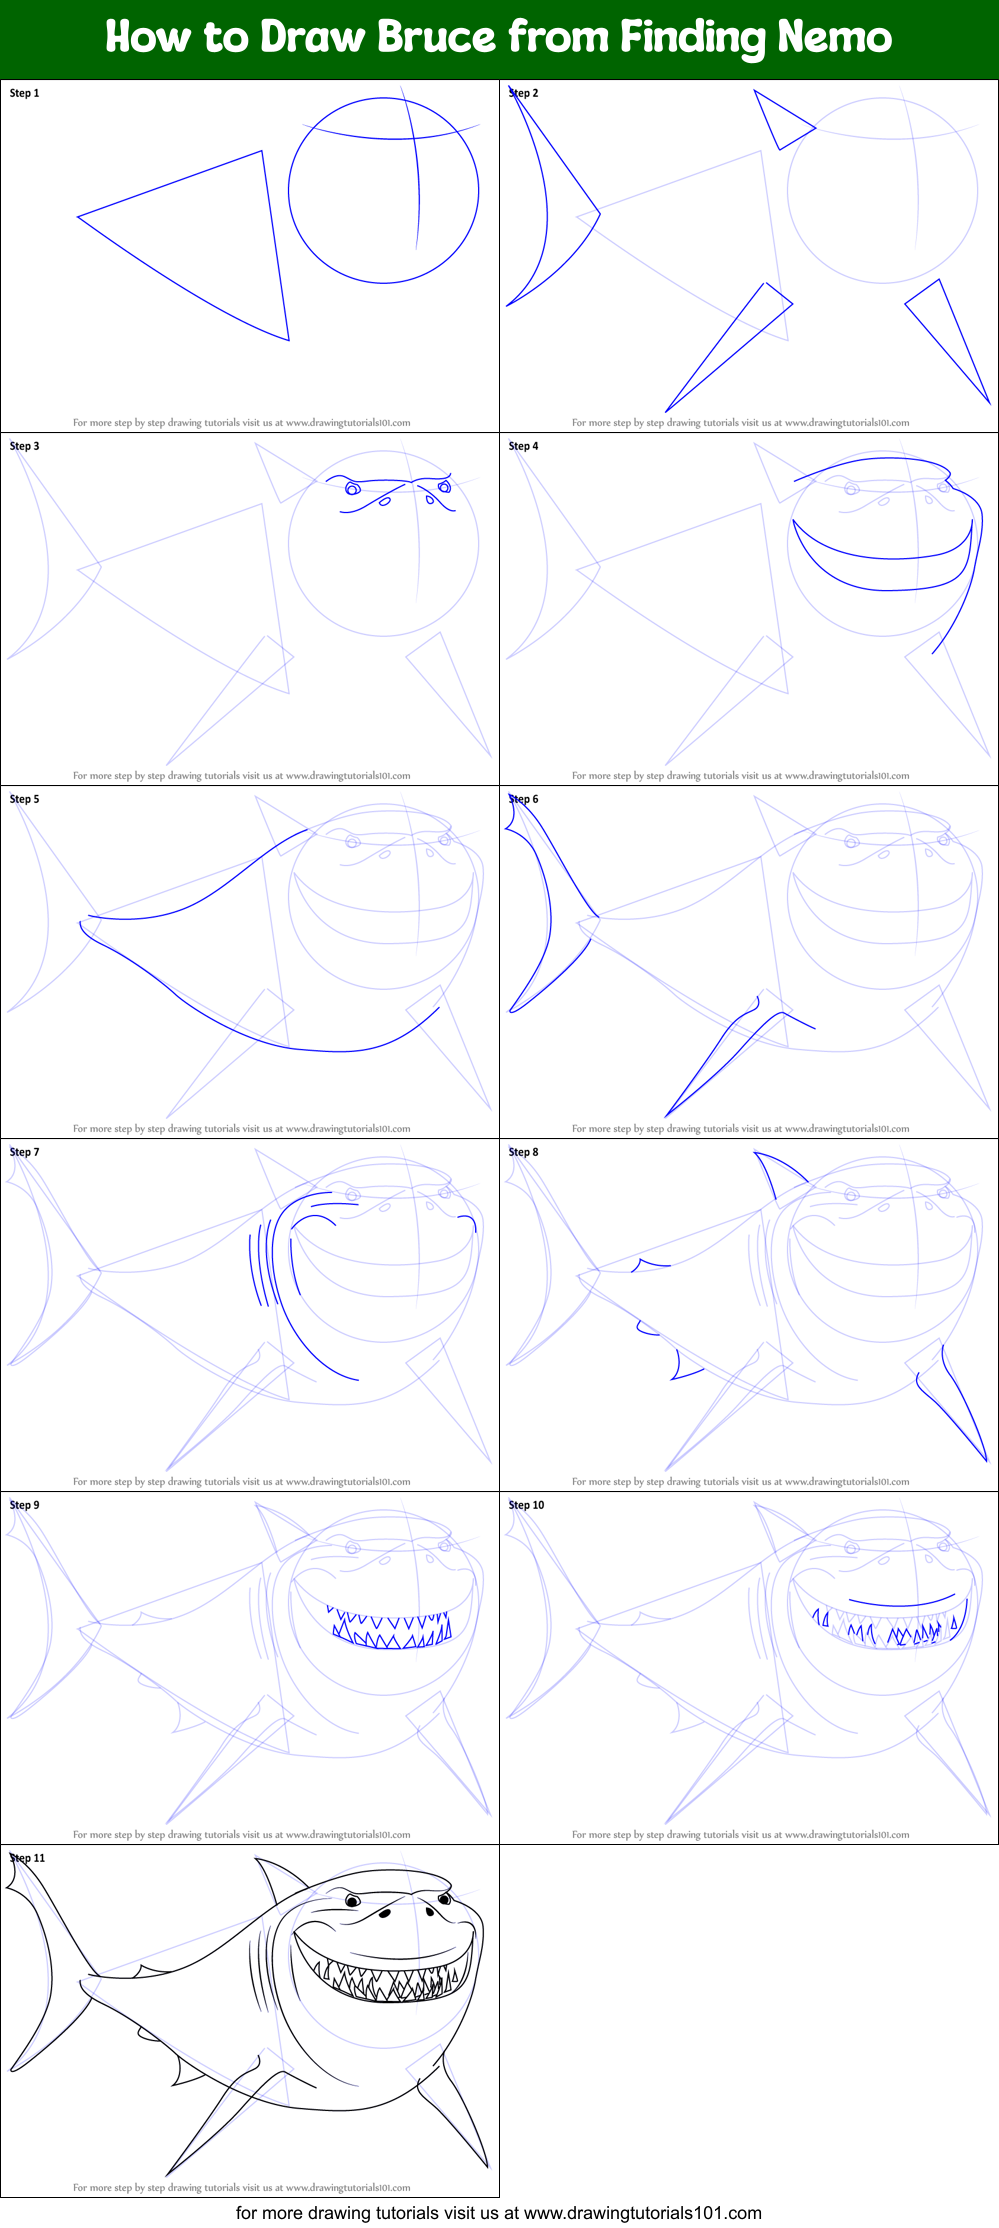 How to Draw Bruce from Finding Nemo printable step by step drawing